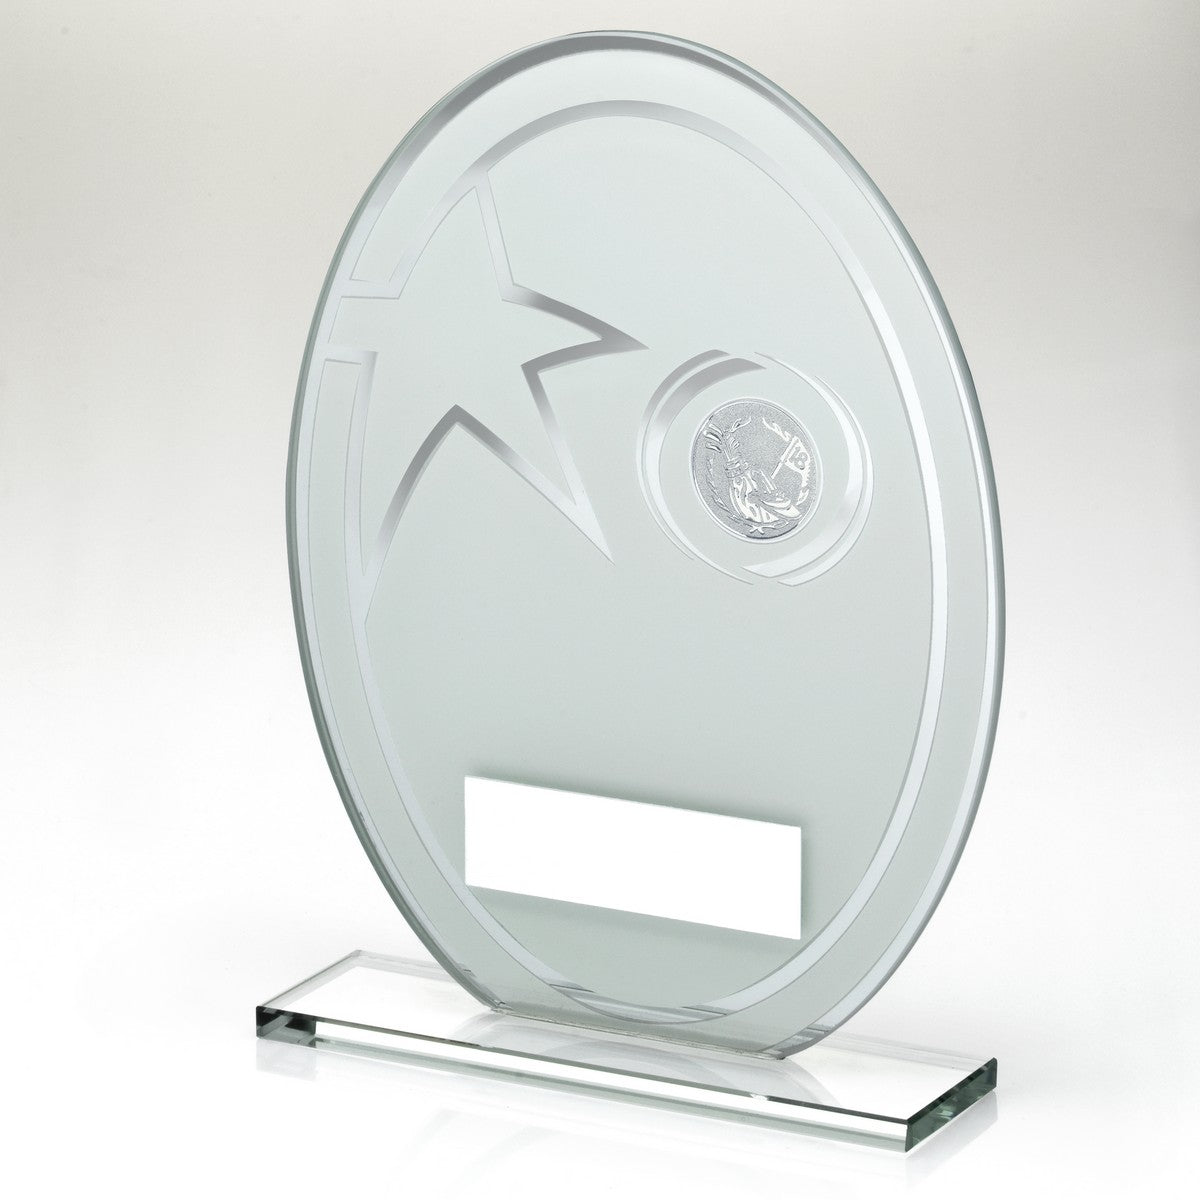 Golf Glass Trophy - Oval with Silver Star